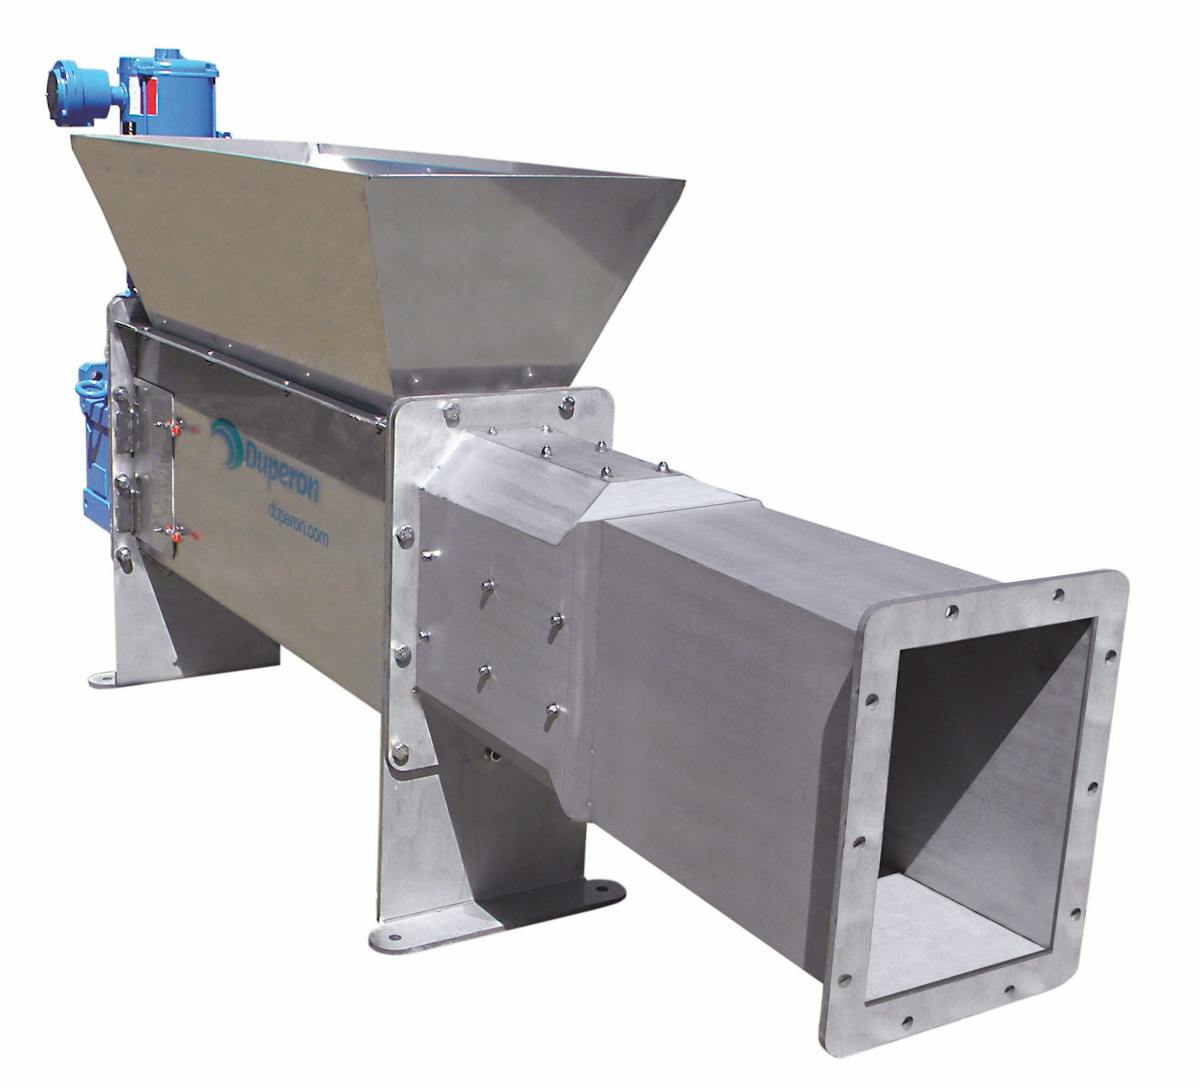 Duperon - Washer Compactor